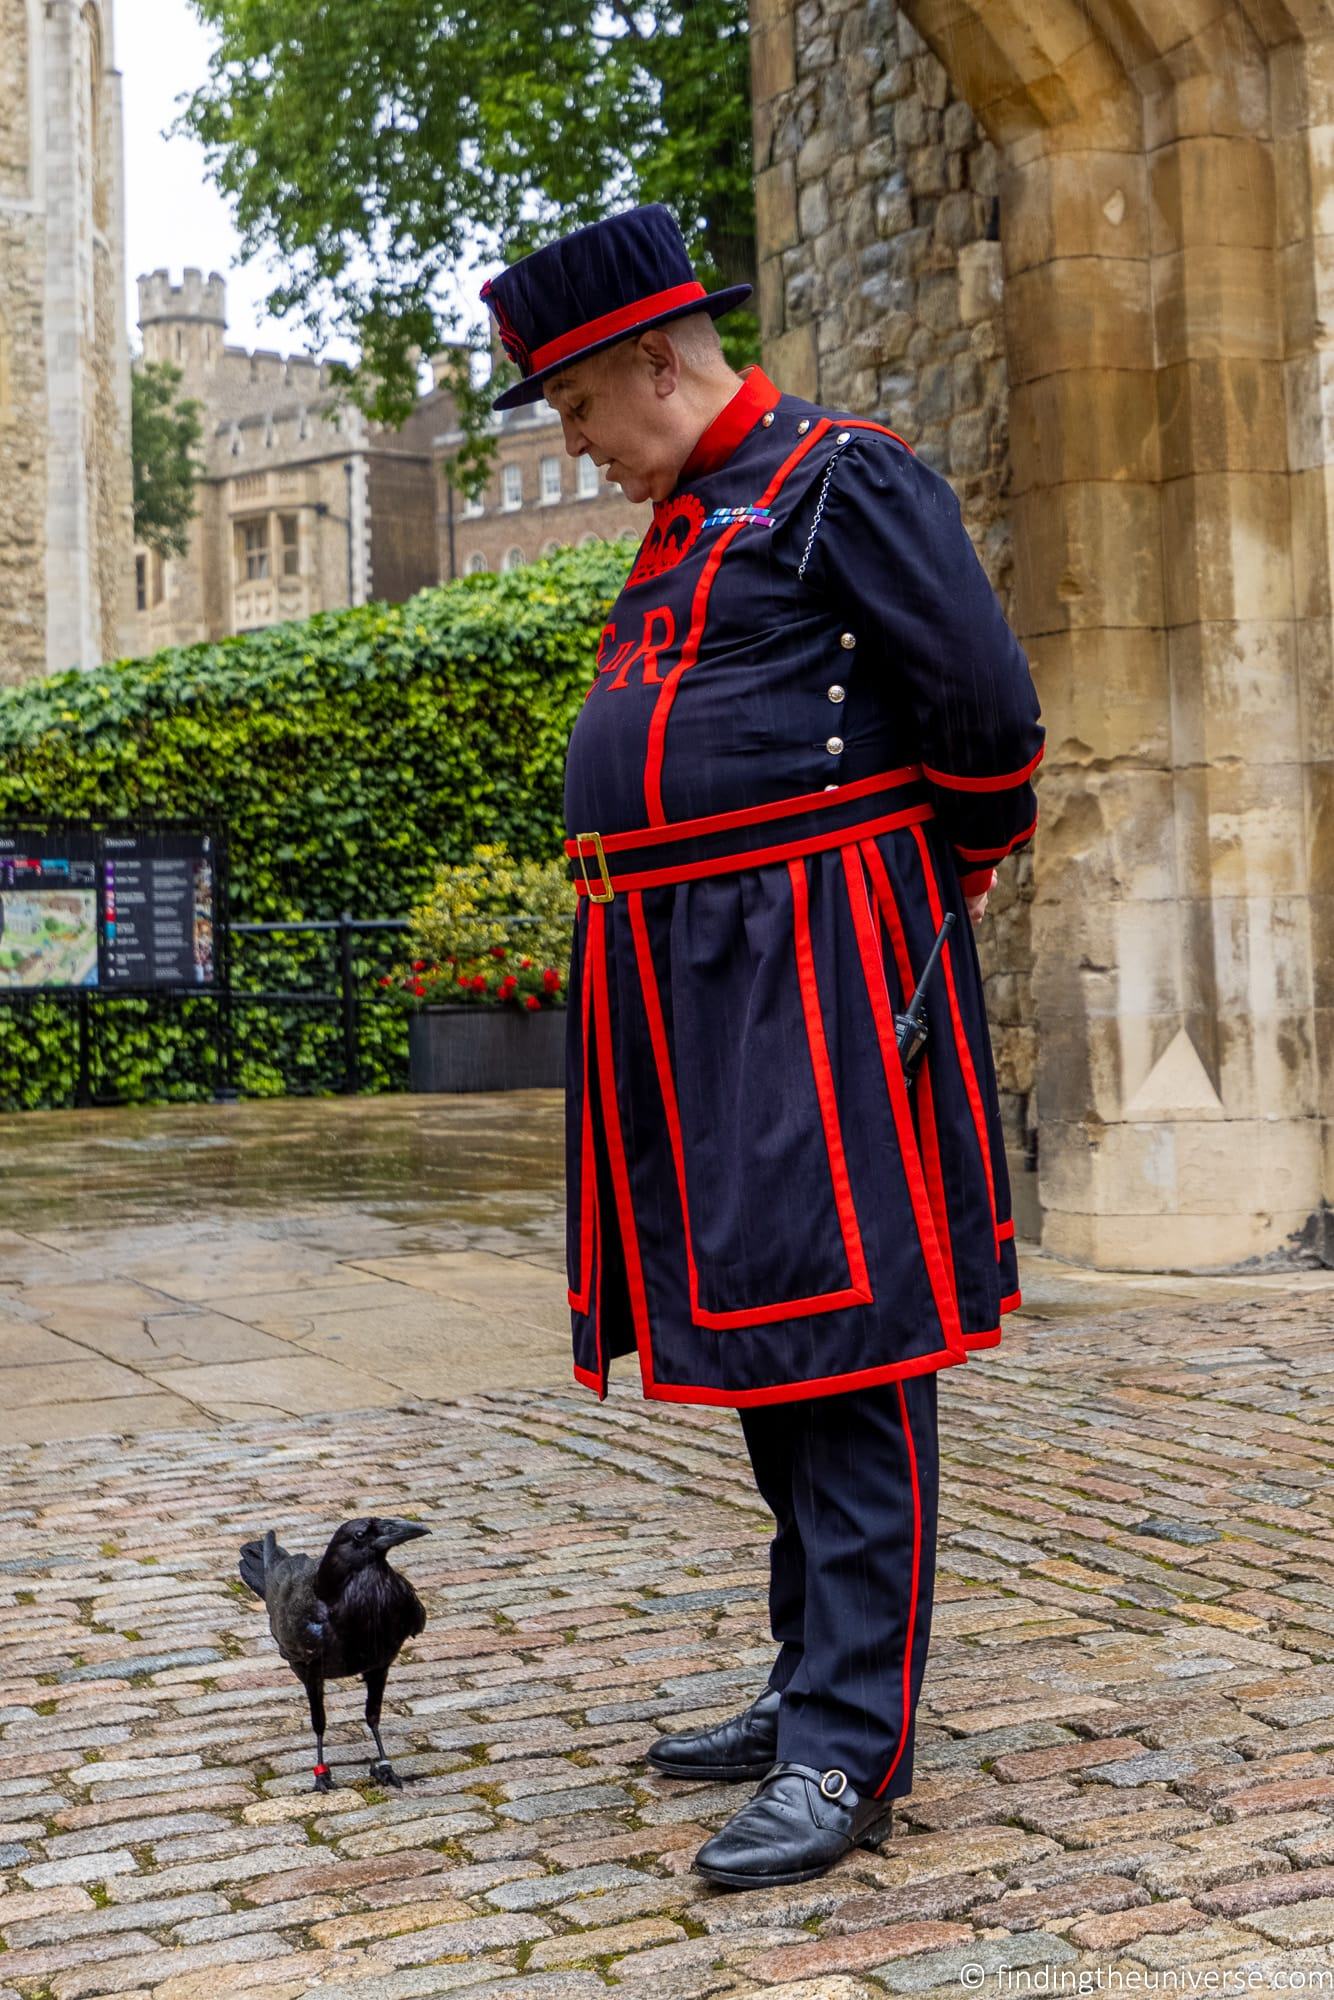 Beefeater and Raven Tower of London